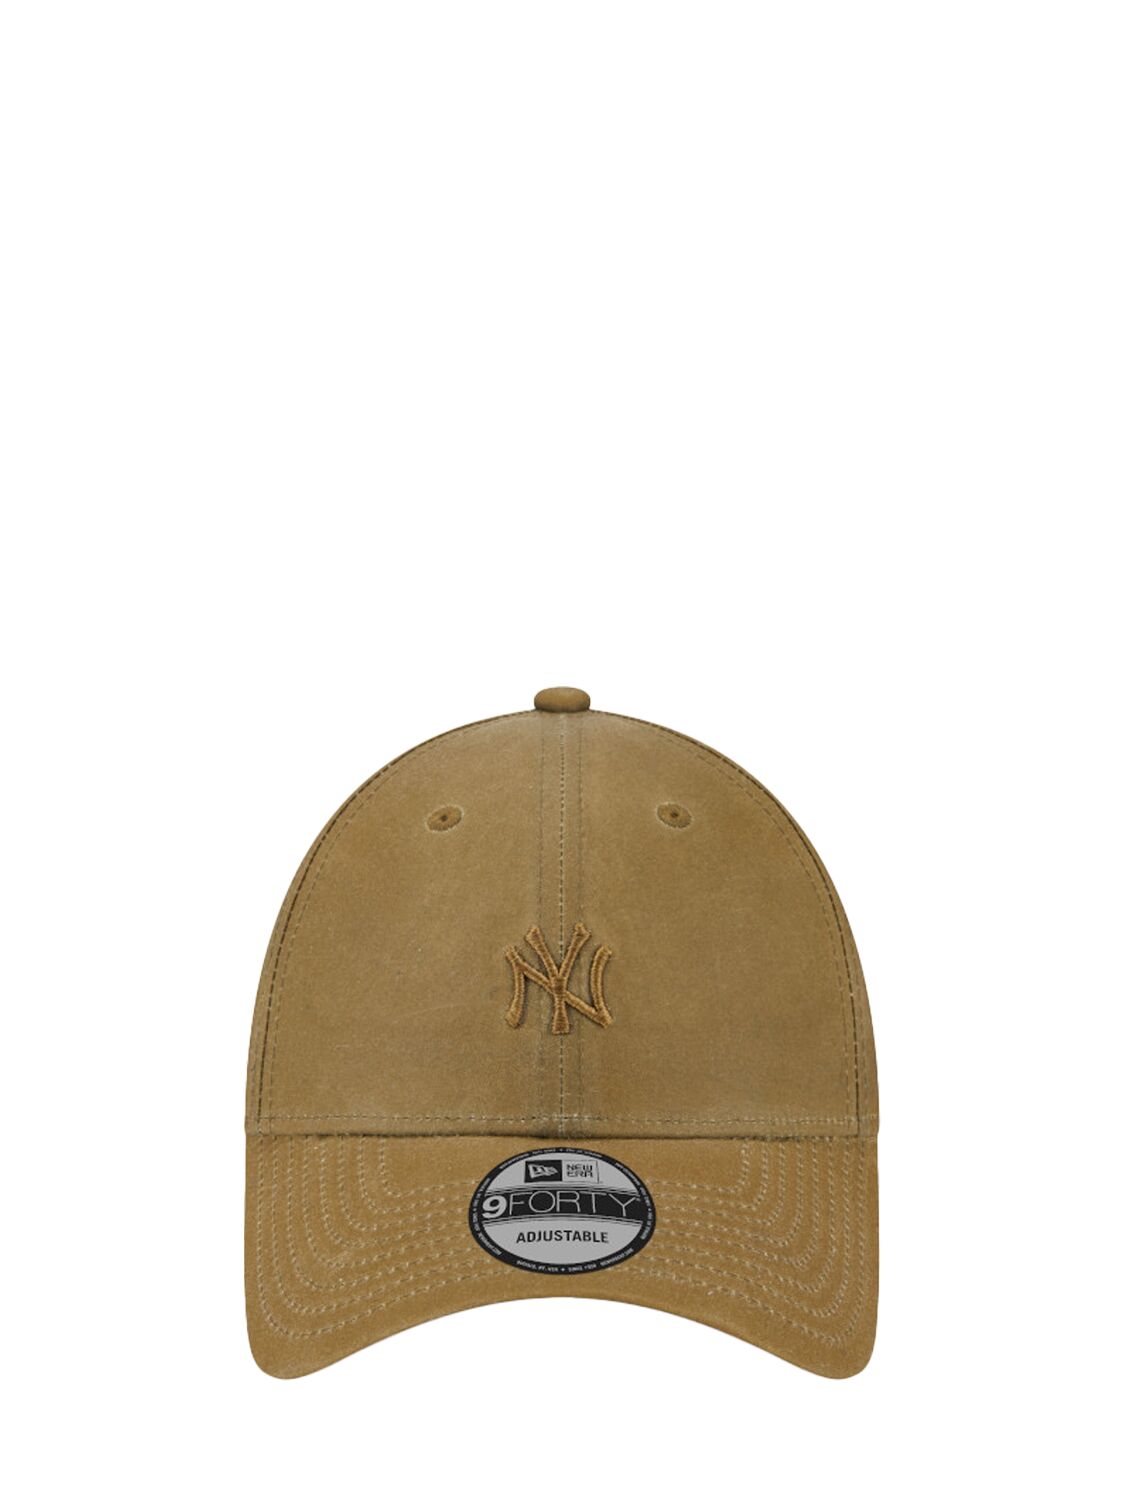 New Era 9forty  Hat In Brown,khaki